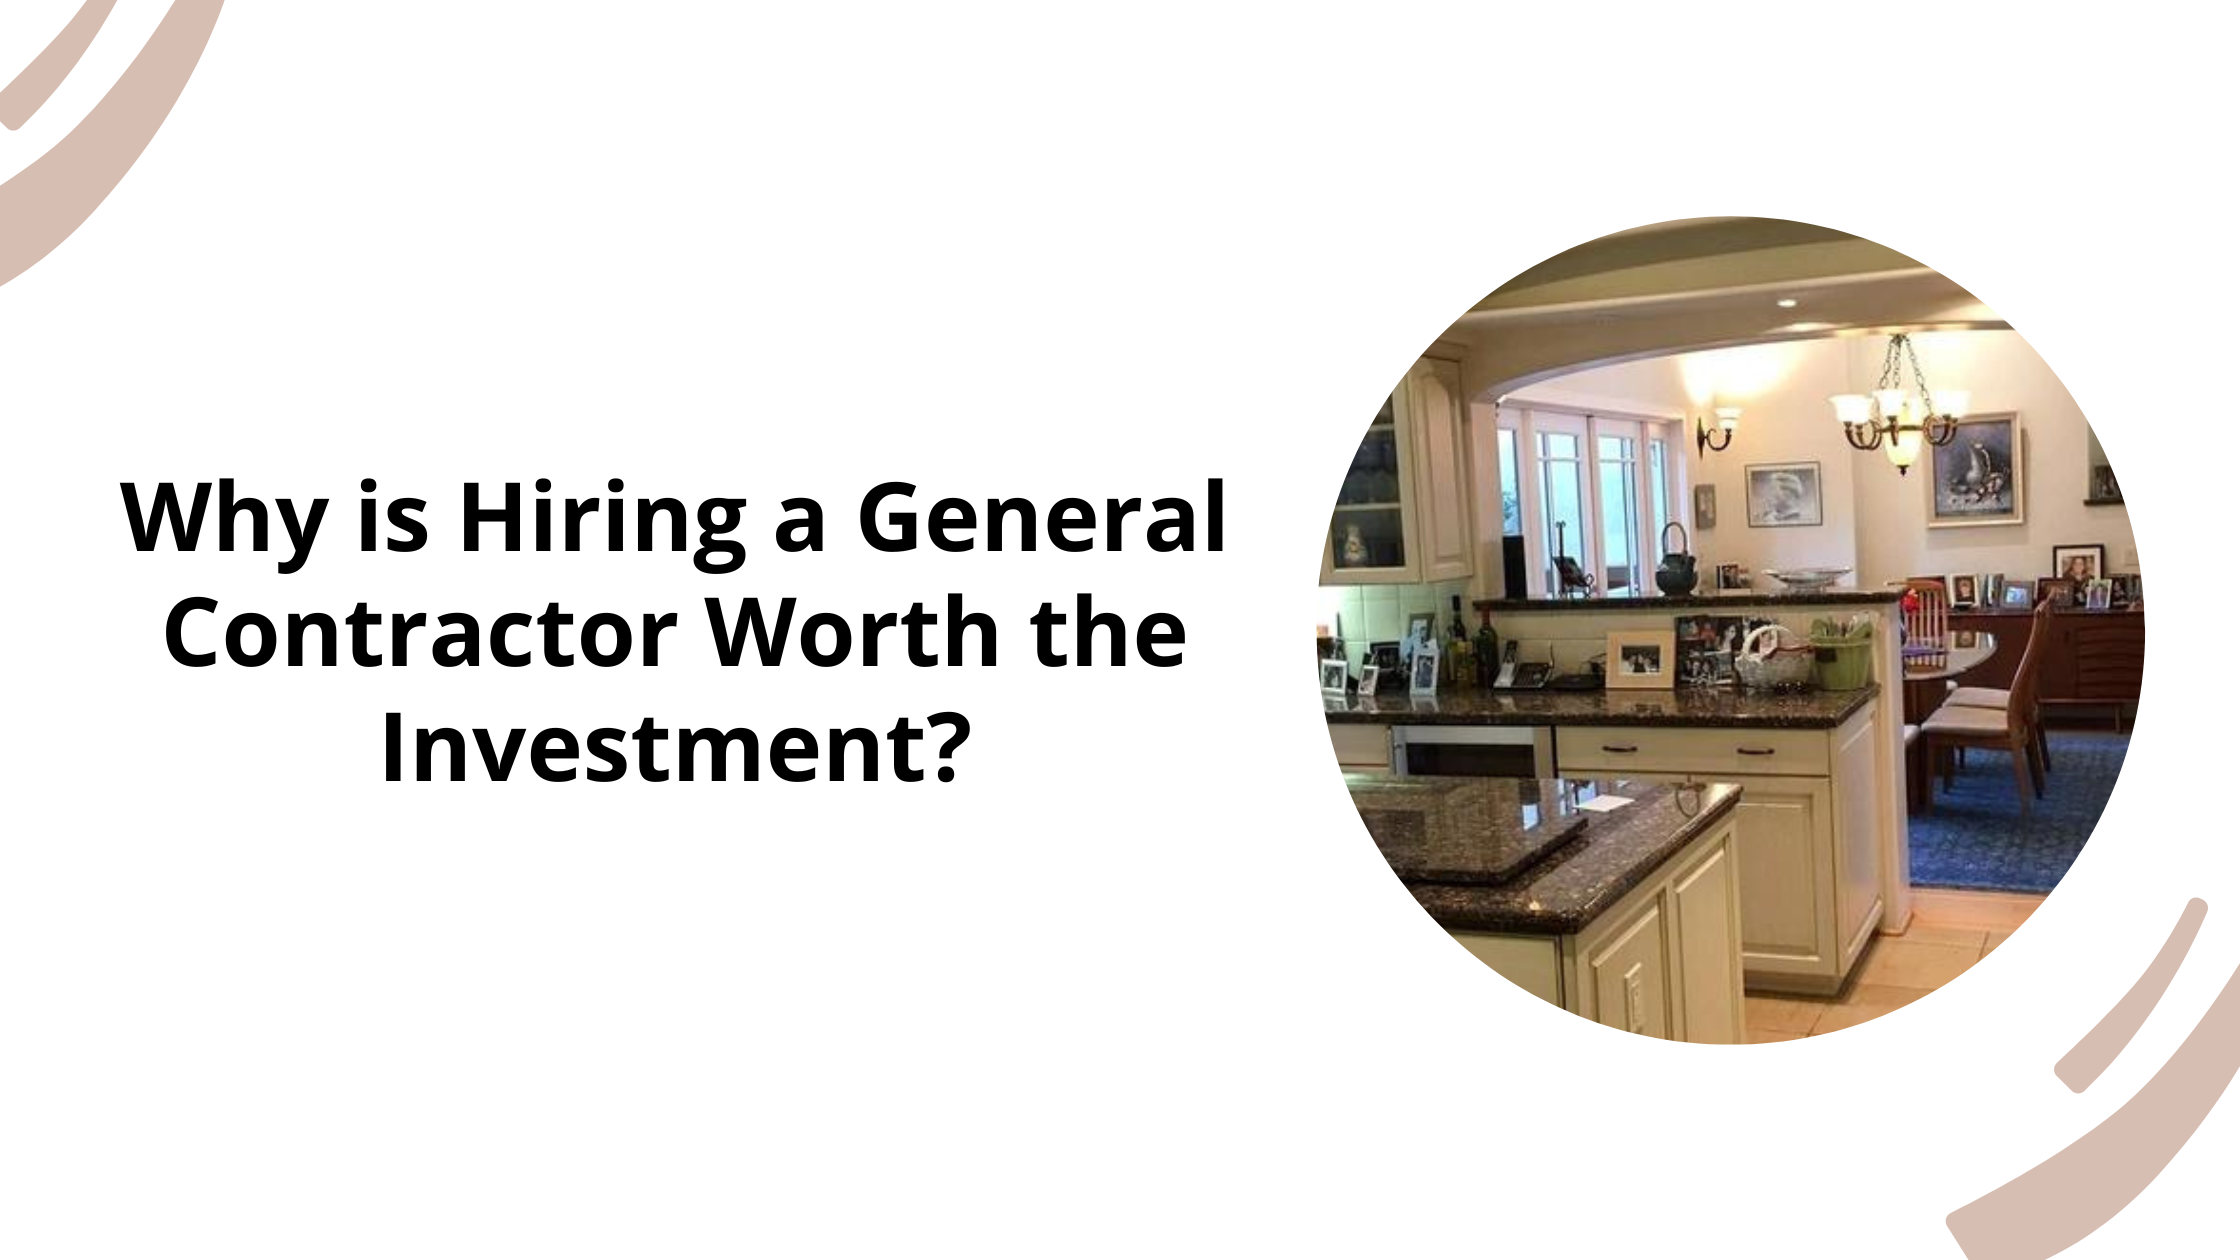 Why is Hiring a General Contractor Worth the Investment?